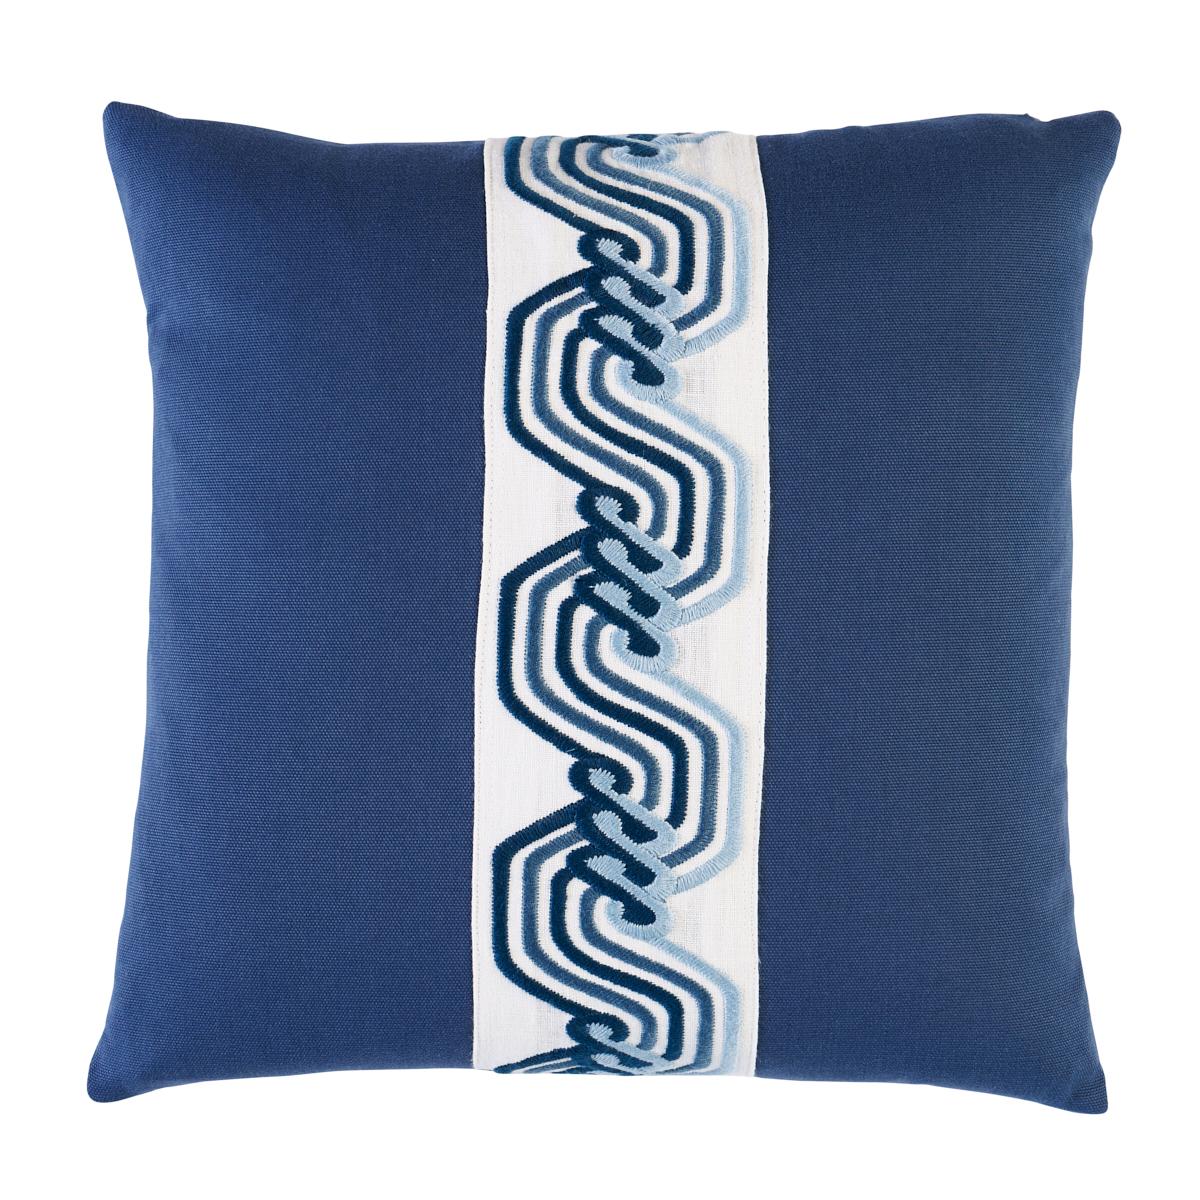 The Twist Embroidered Pillow 18"